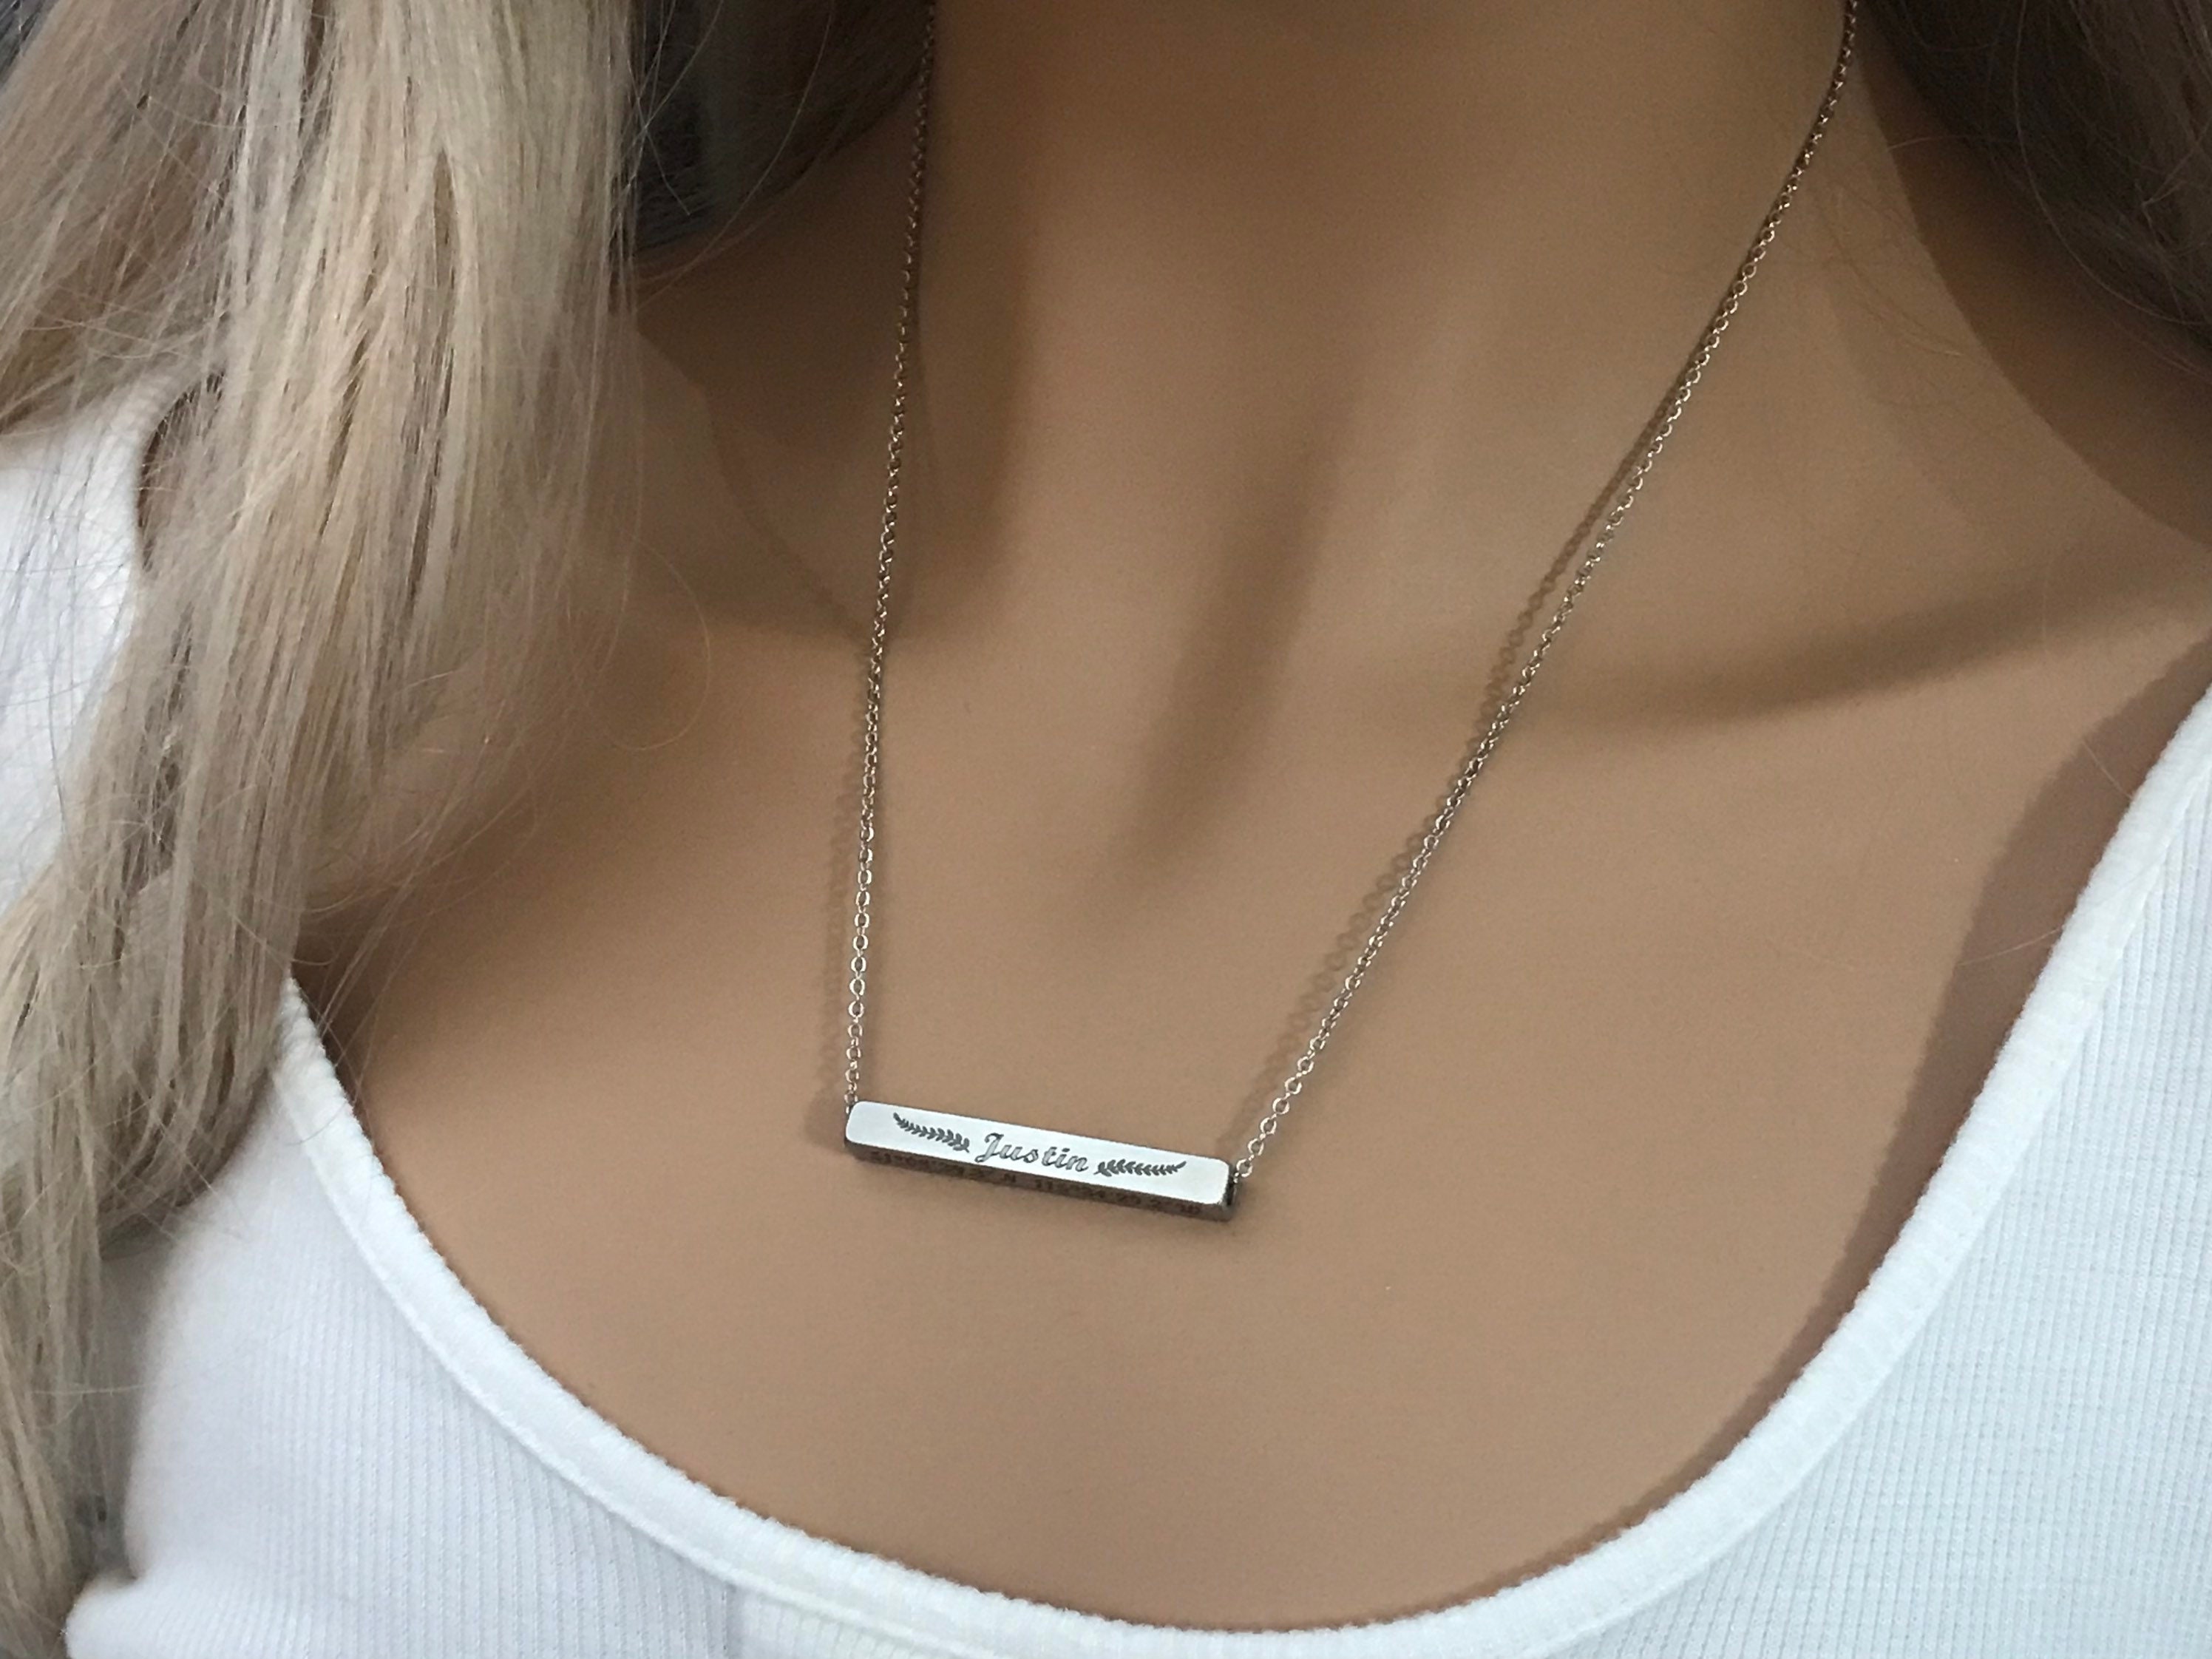 Small Bar Necklace, Delicate Necklace, Skinny Bar Necklace Engraved,  Initial Bar Necklace Gold, Silver, Rose Gold 4x30